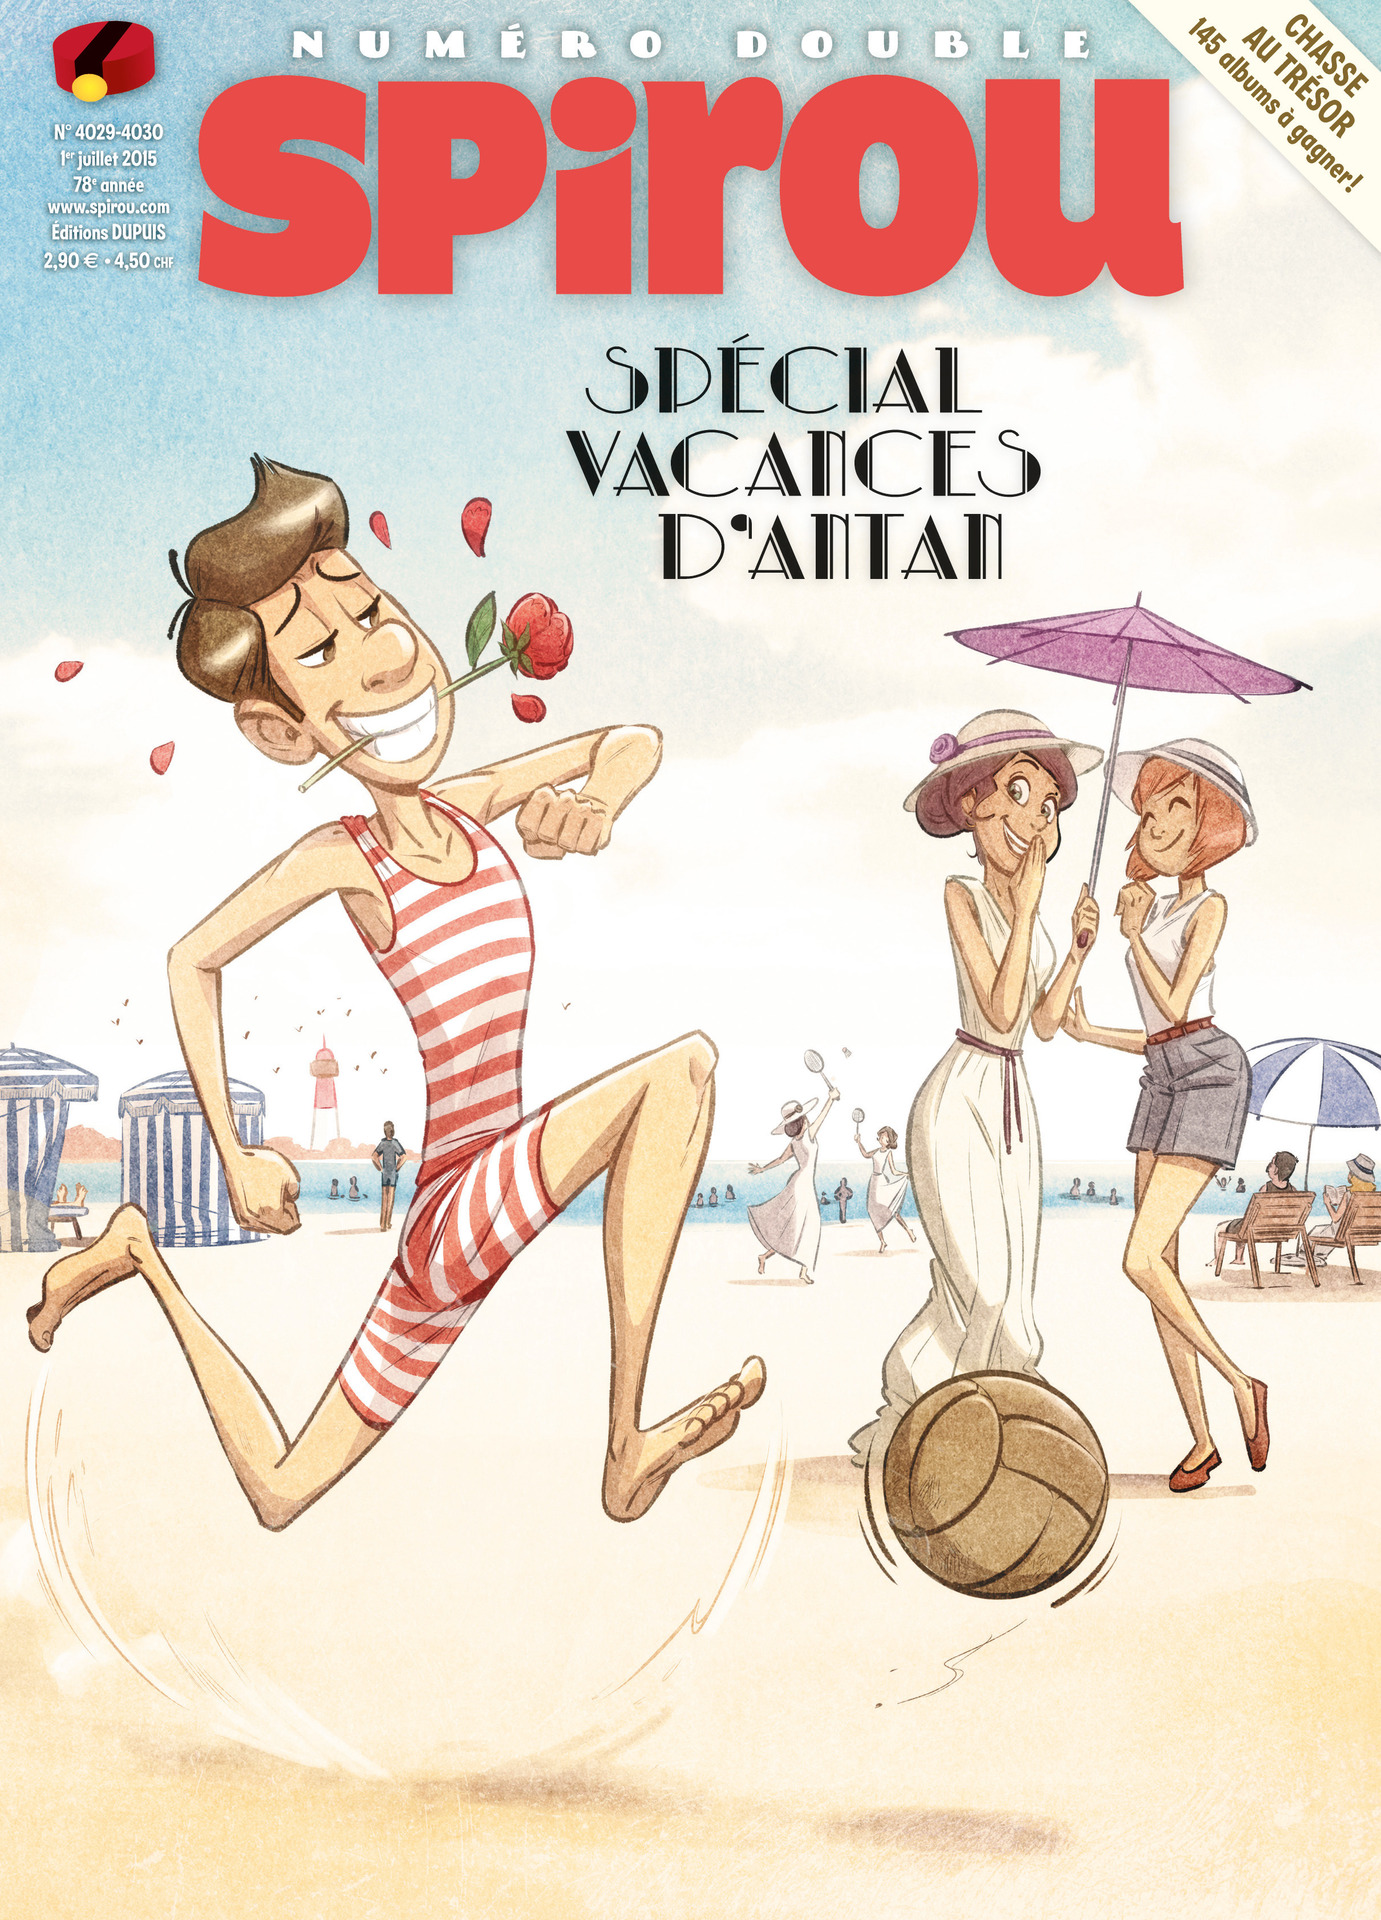 Spirou goes on vacation